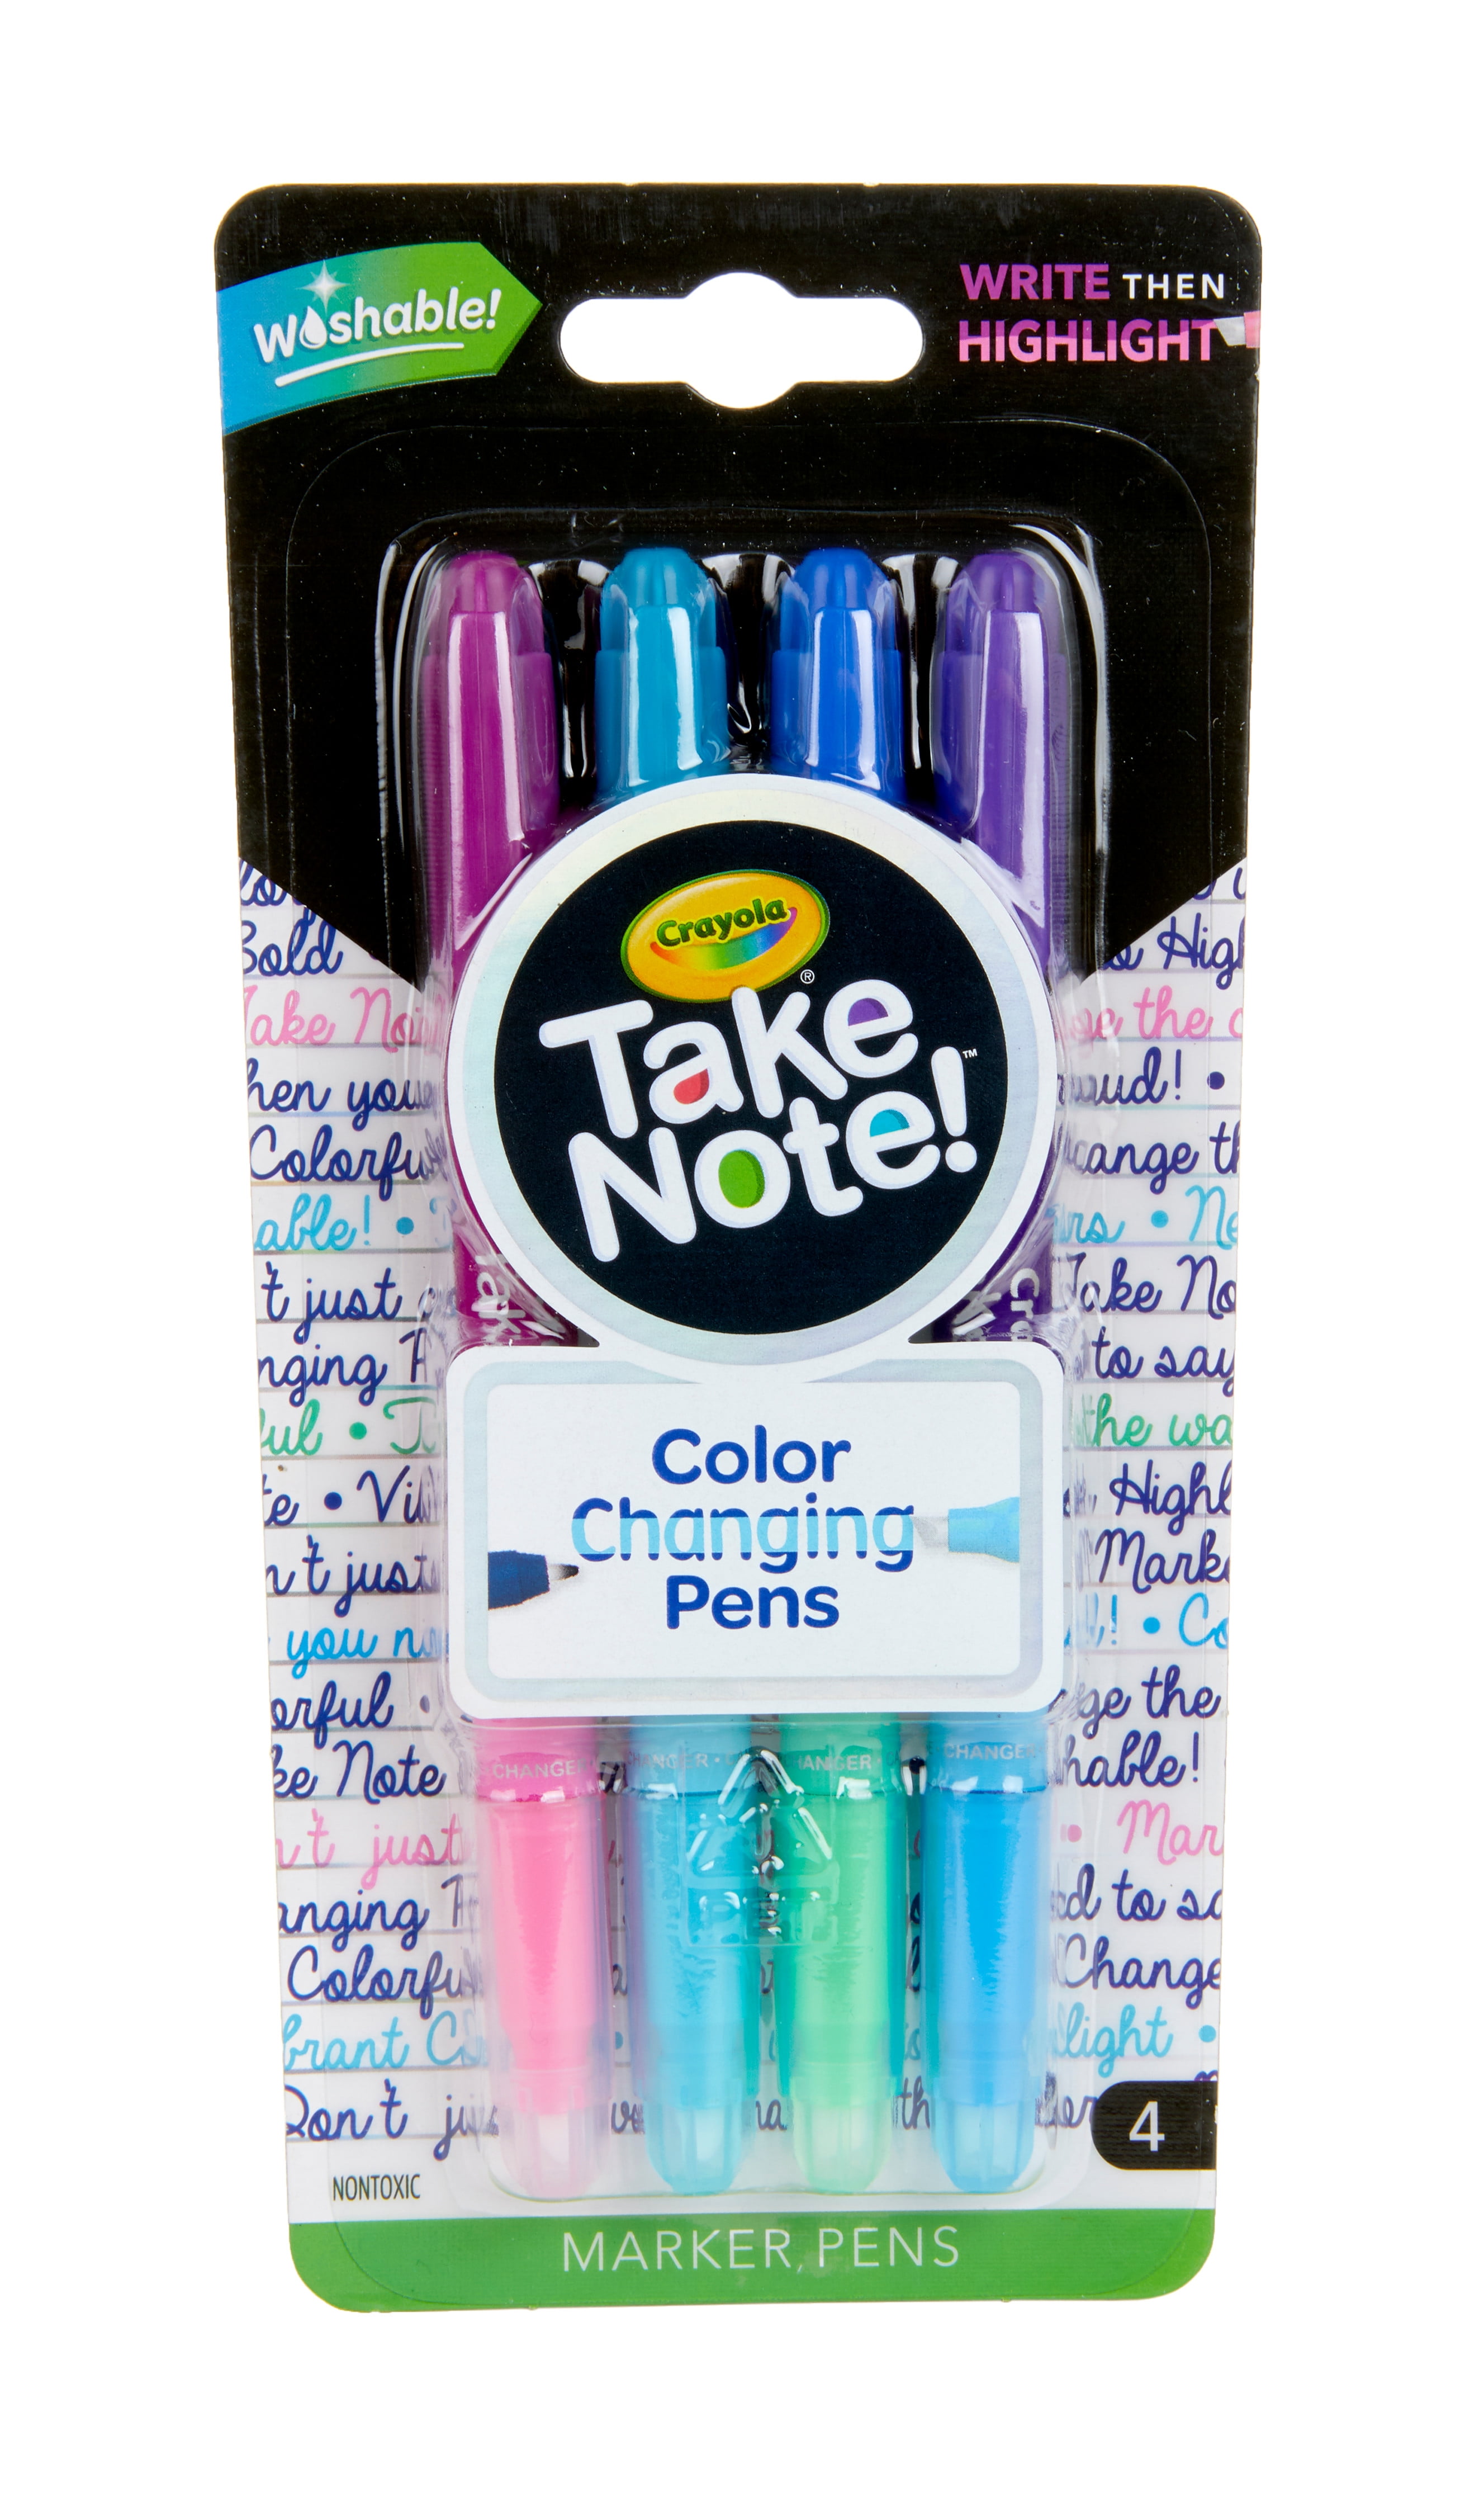 2 Packs Crayola Take Note Washable Gel Pens Total of 4 Pens Variety Colors